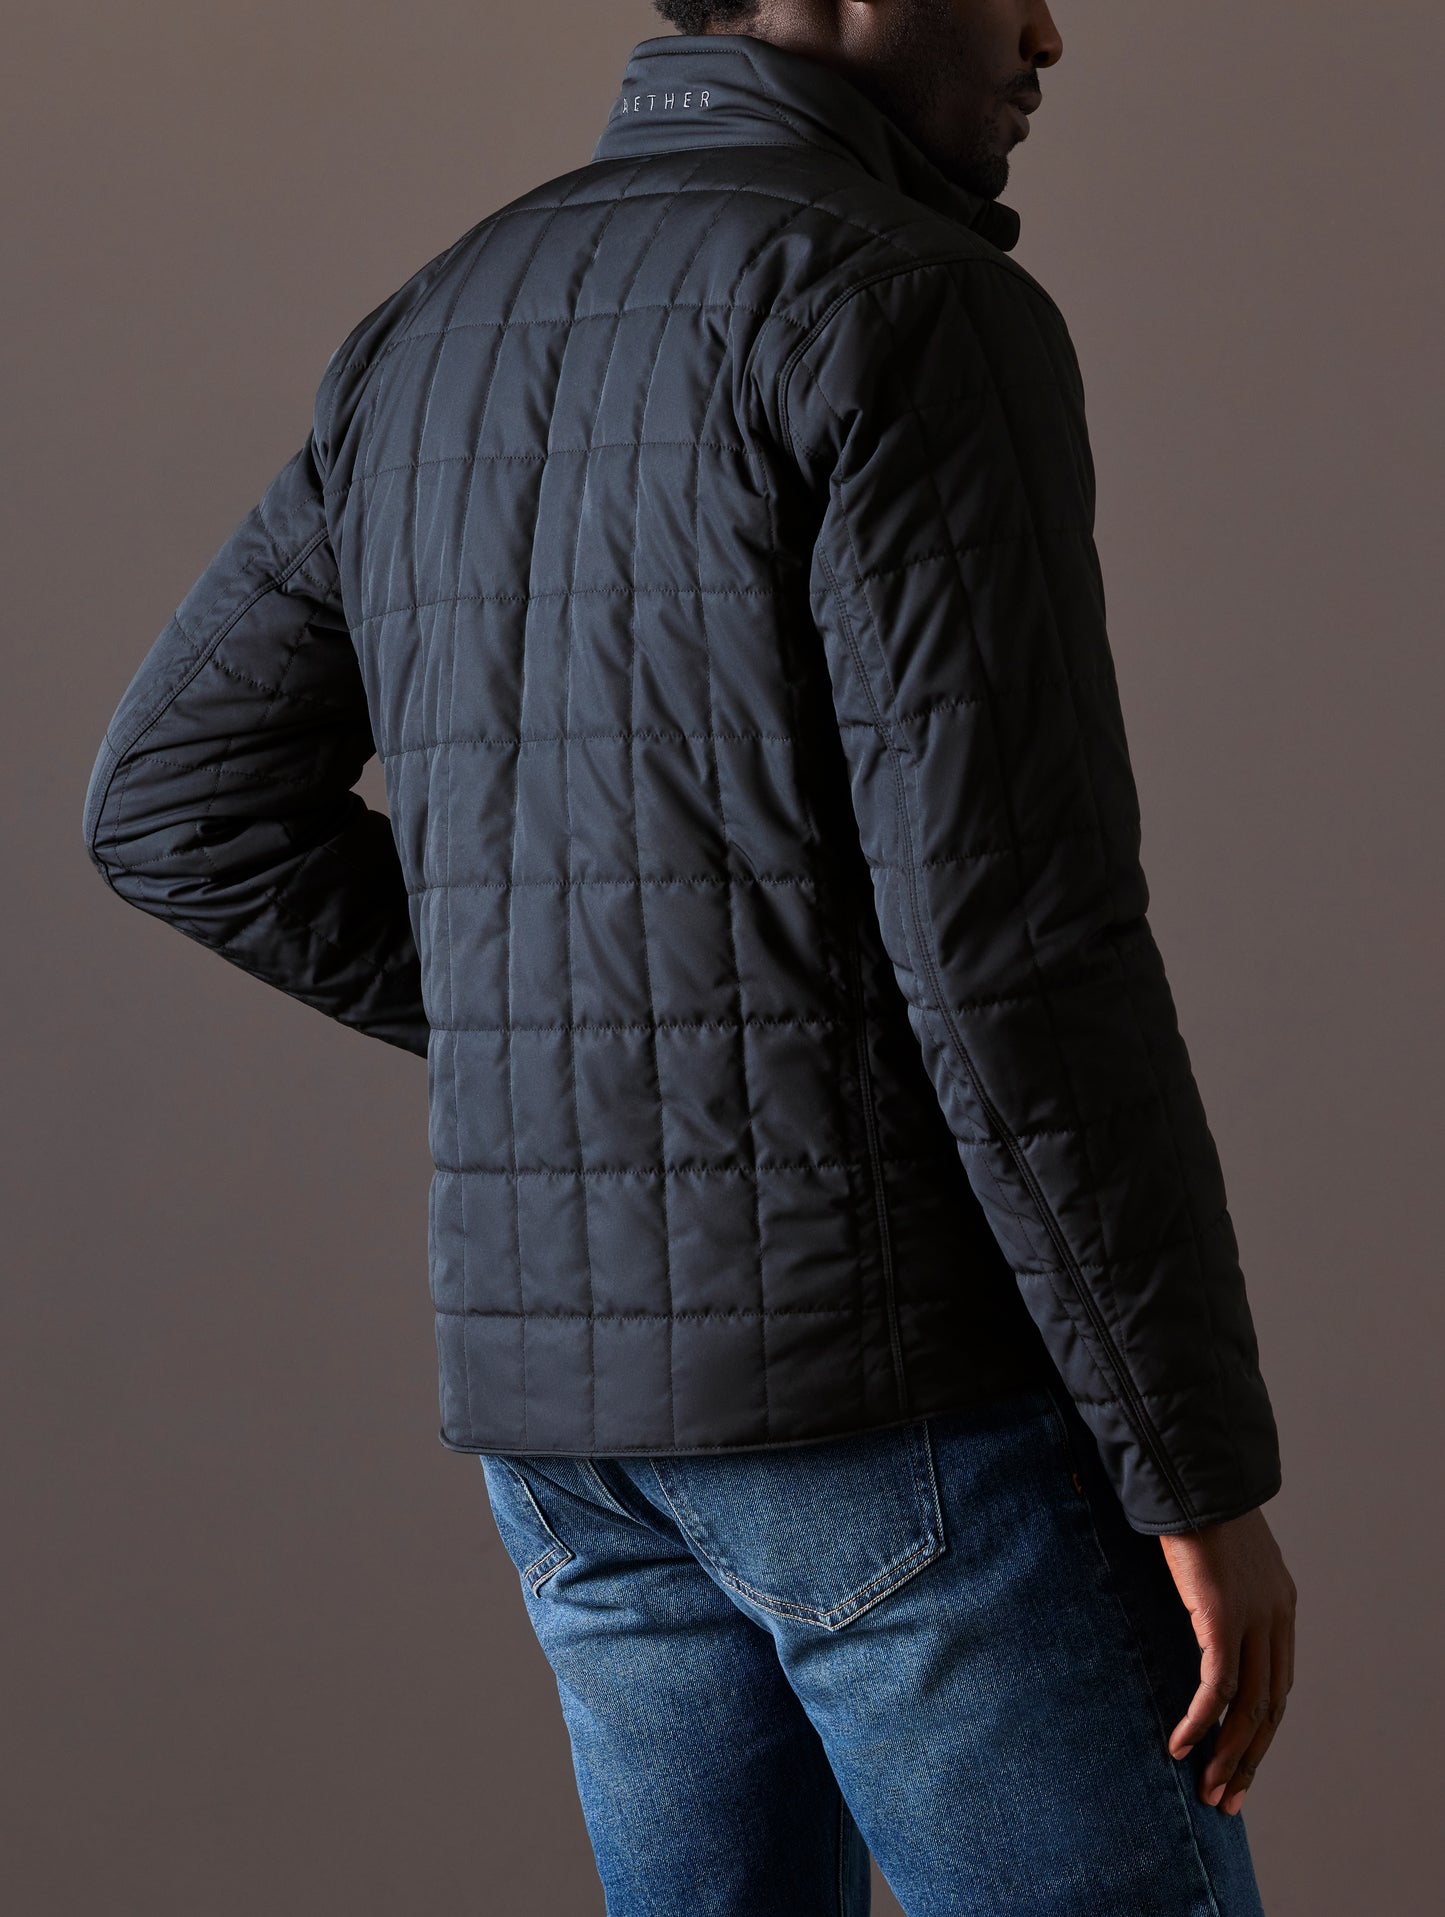 Back view of man wearing black quilted jacket